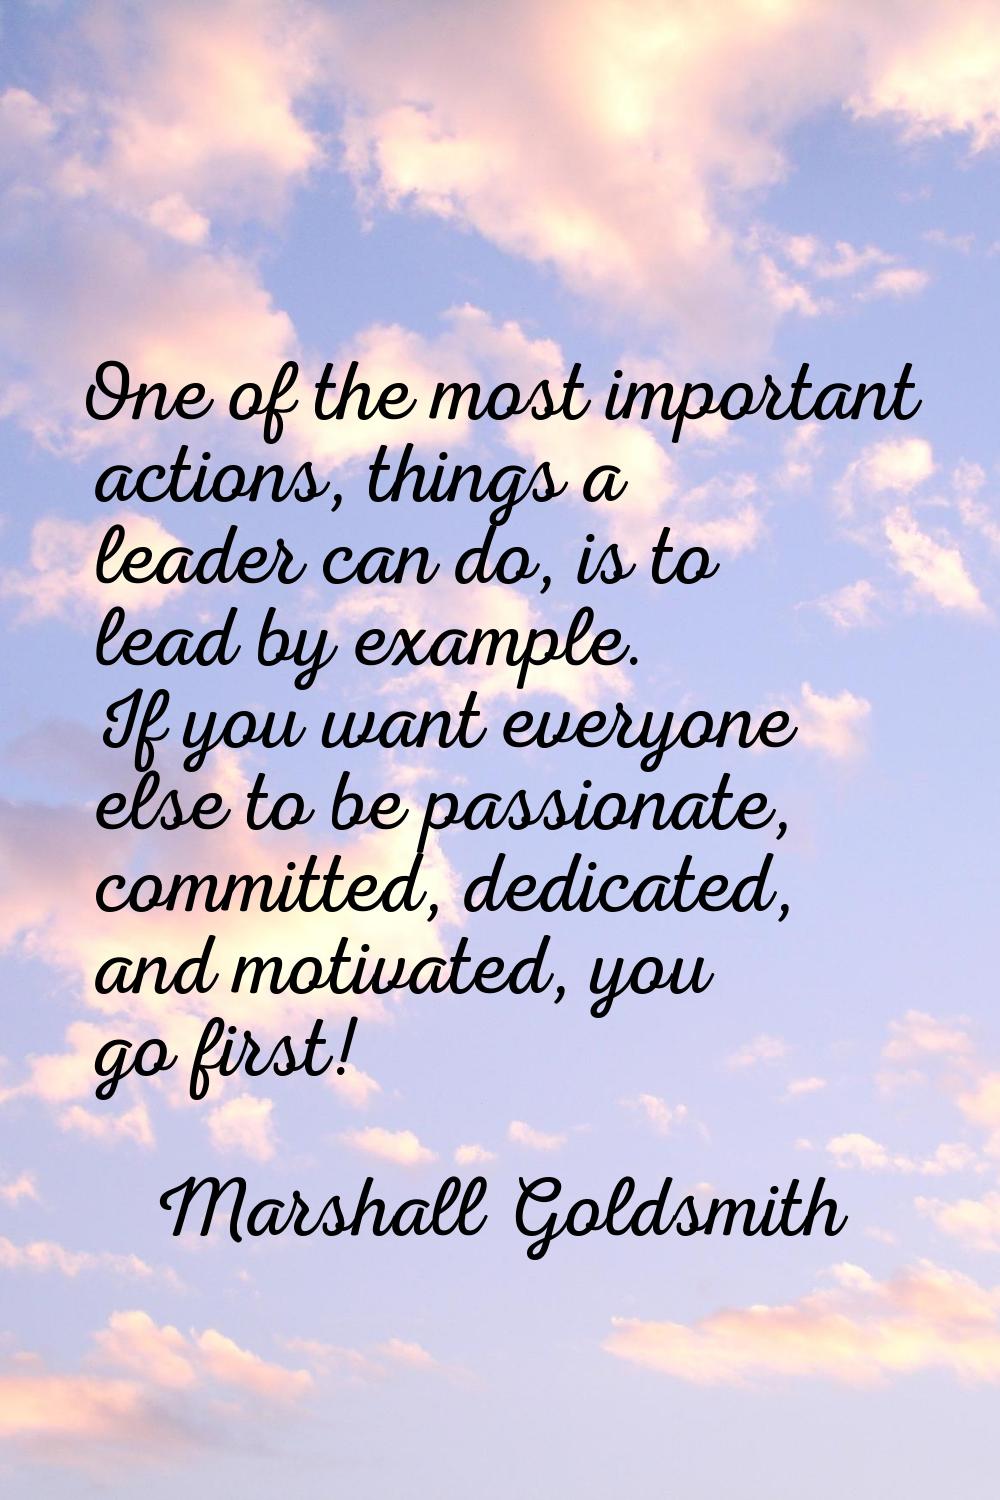 One of the most important actions, things a leader can do, is to lead by example. If you want every